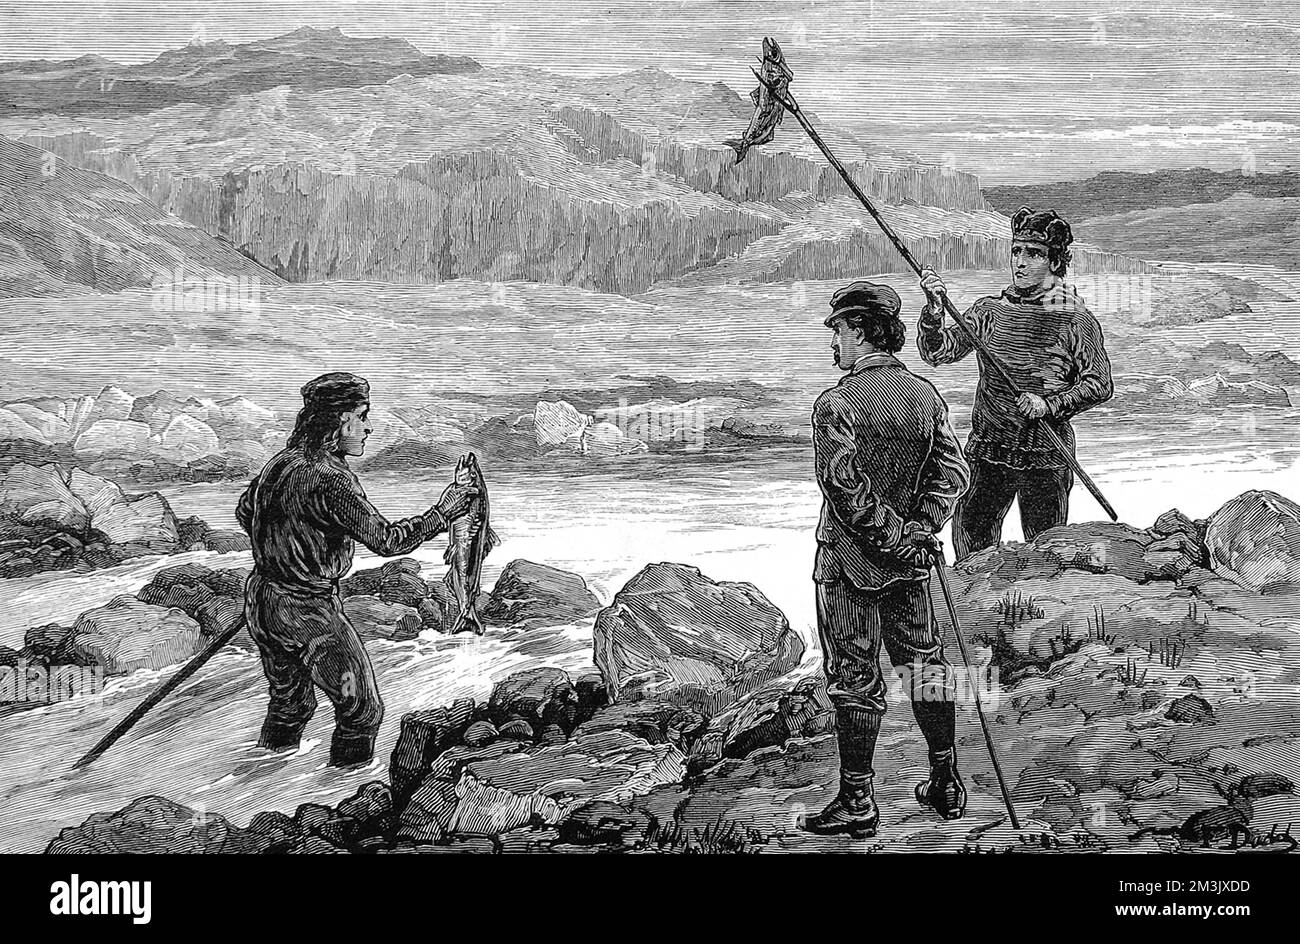 Members of the American Franklin Search Expedition of 1878-1880, catching fish in the salmon creek. This expedition was one of many to search the Arctic for signs of Sir John Franklin's ill-fated Arctic expedition of 1845.  In 1845 the British Admiralty sent two polar exploration ships, HMS 'Erebus' and HMS 'Terror', to look for the Northwest passage round the northern coast of Canada. The expedition, commanded by Sir John Franklin, disappeared from view late in 1845 and none of the men were ever seen again.   In fact the ships made it to the King William Island region, then got stuck in the i Stock Photo